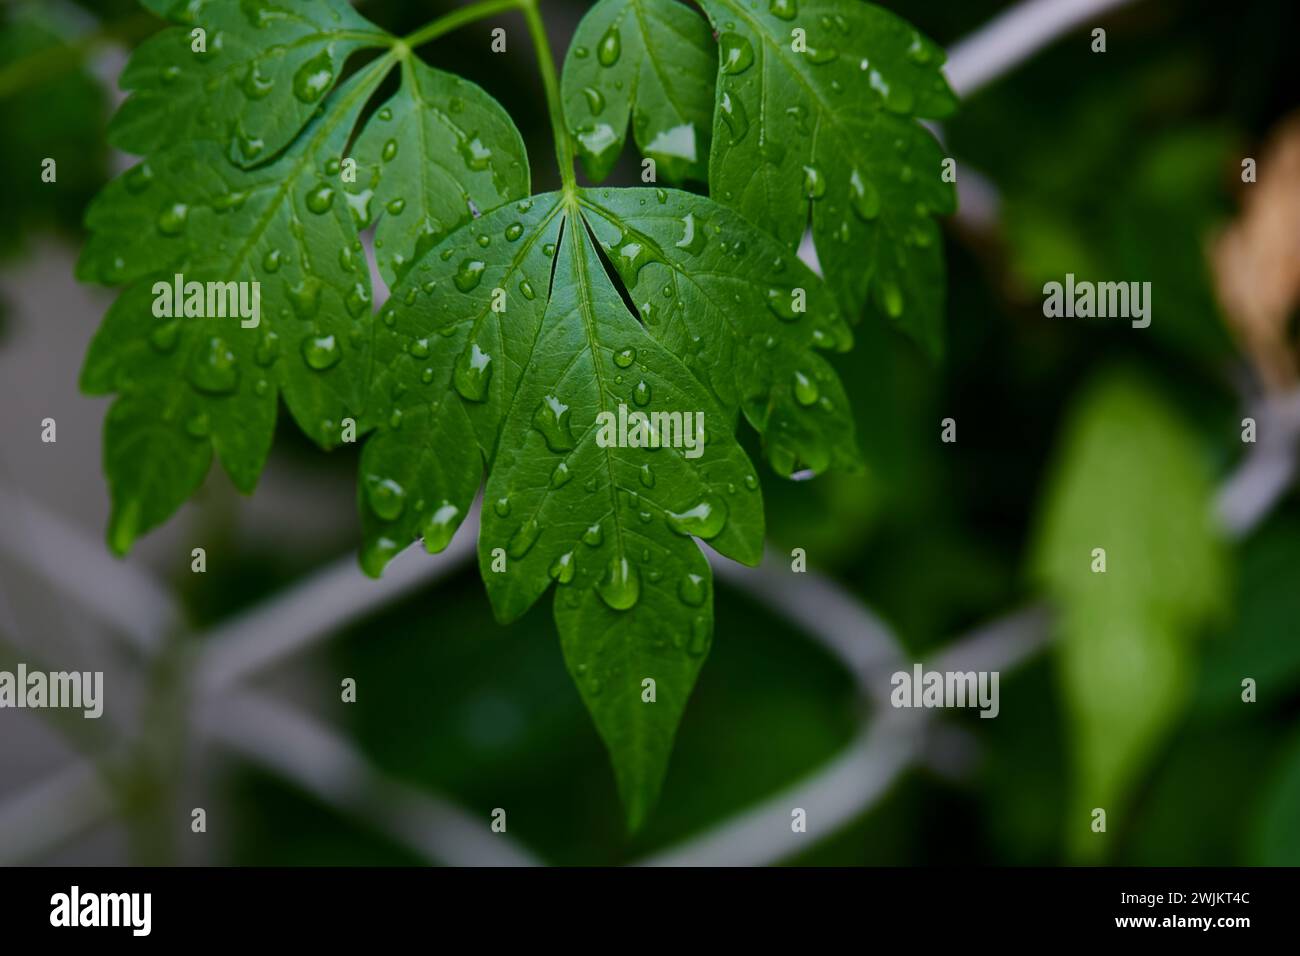 Close-up view of raindrops on green leaf Stock Photo